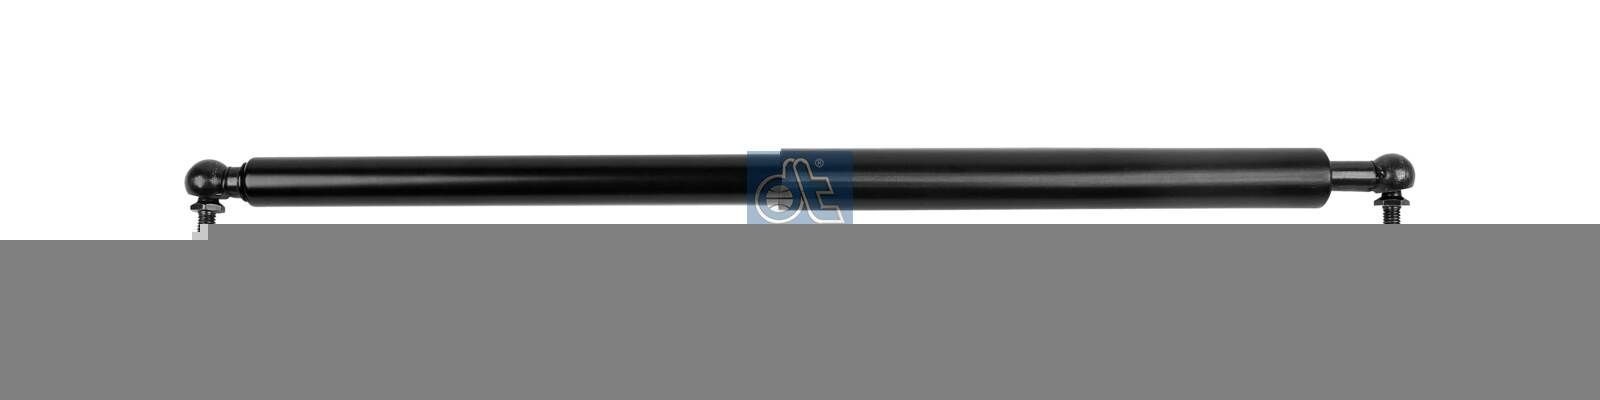 95396 DT Spare Parts 3.80768 Gas Spring 83748210506